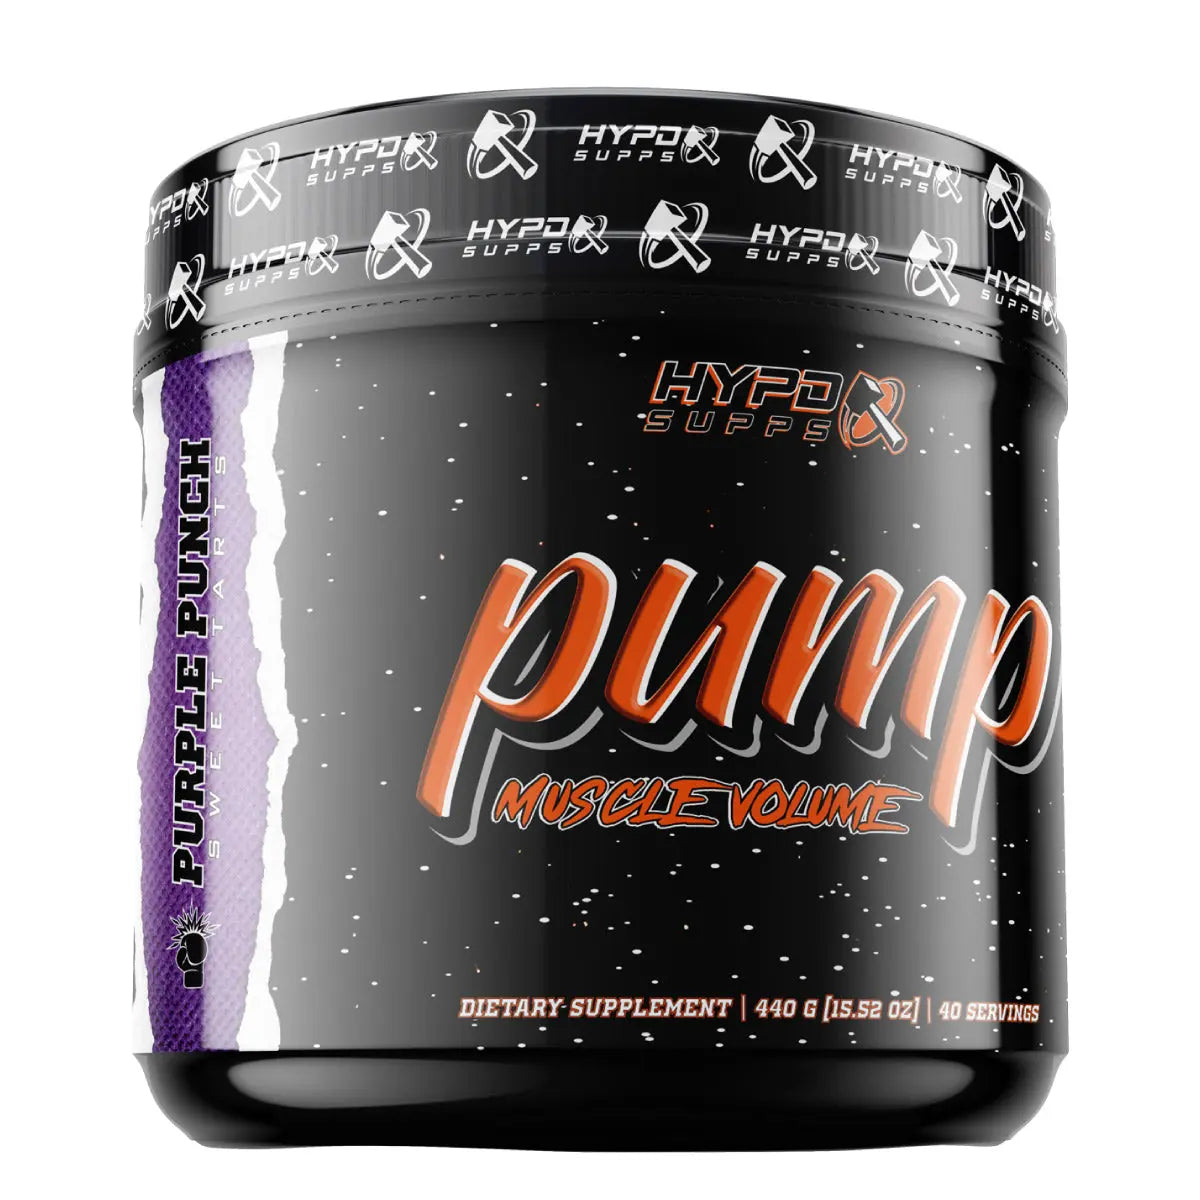 PUMP | PURE MUSCLE VOLUME hypd